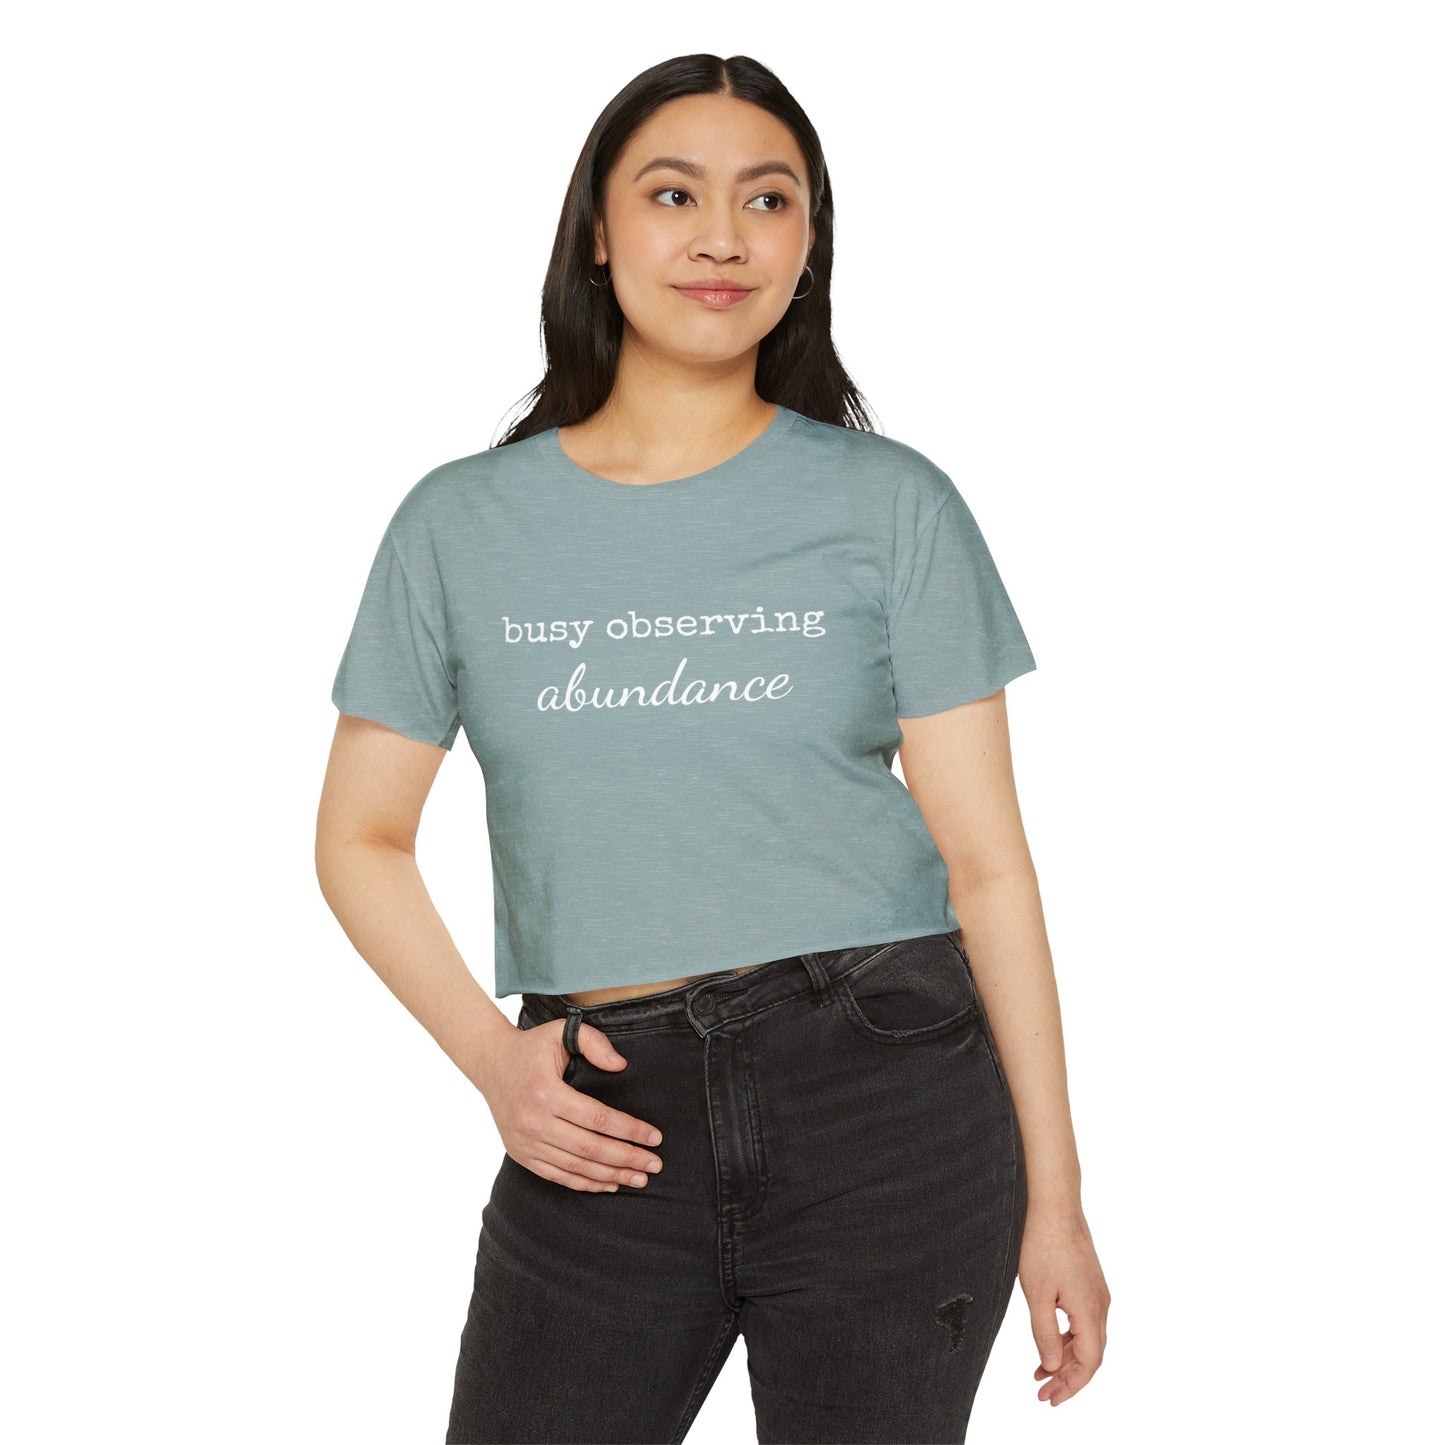 "Busy Observing Abundance" Cropped Tee